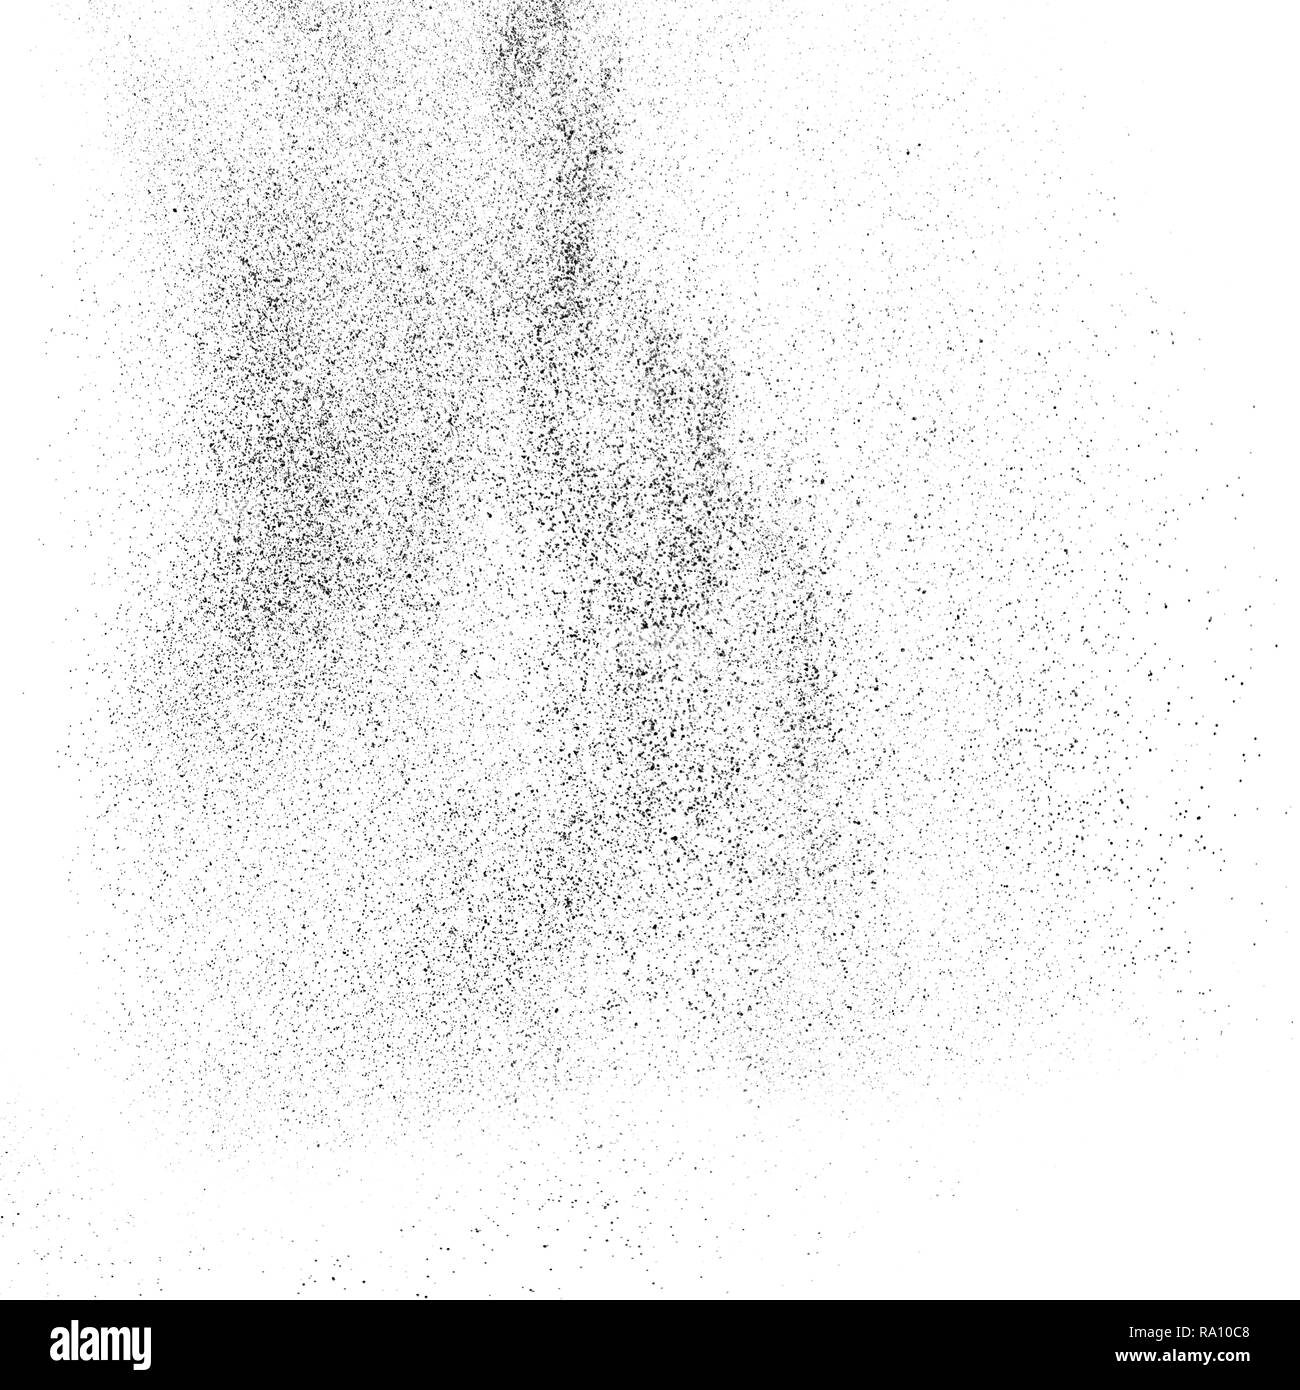 Black powder explosion against white background.The particles of charcoal splatted on white background. Closeup of black dust particles explode isolat Stock Photo